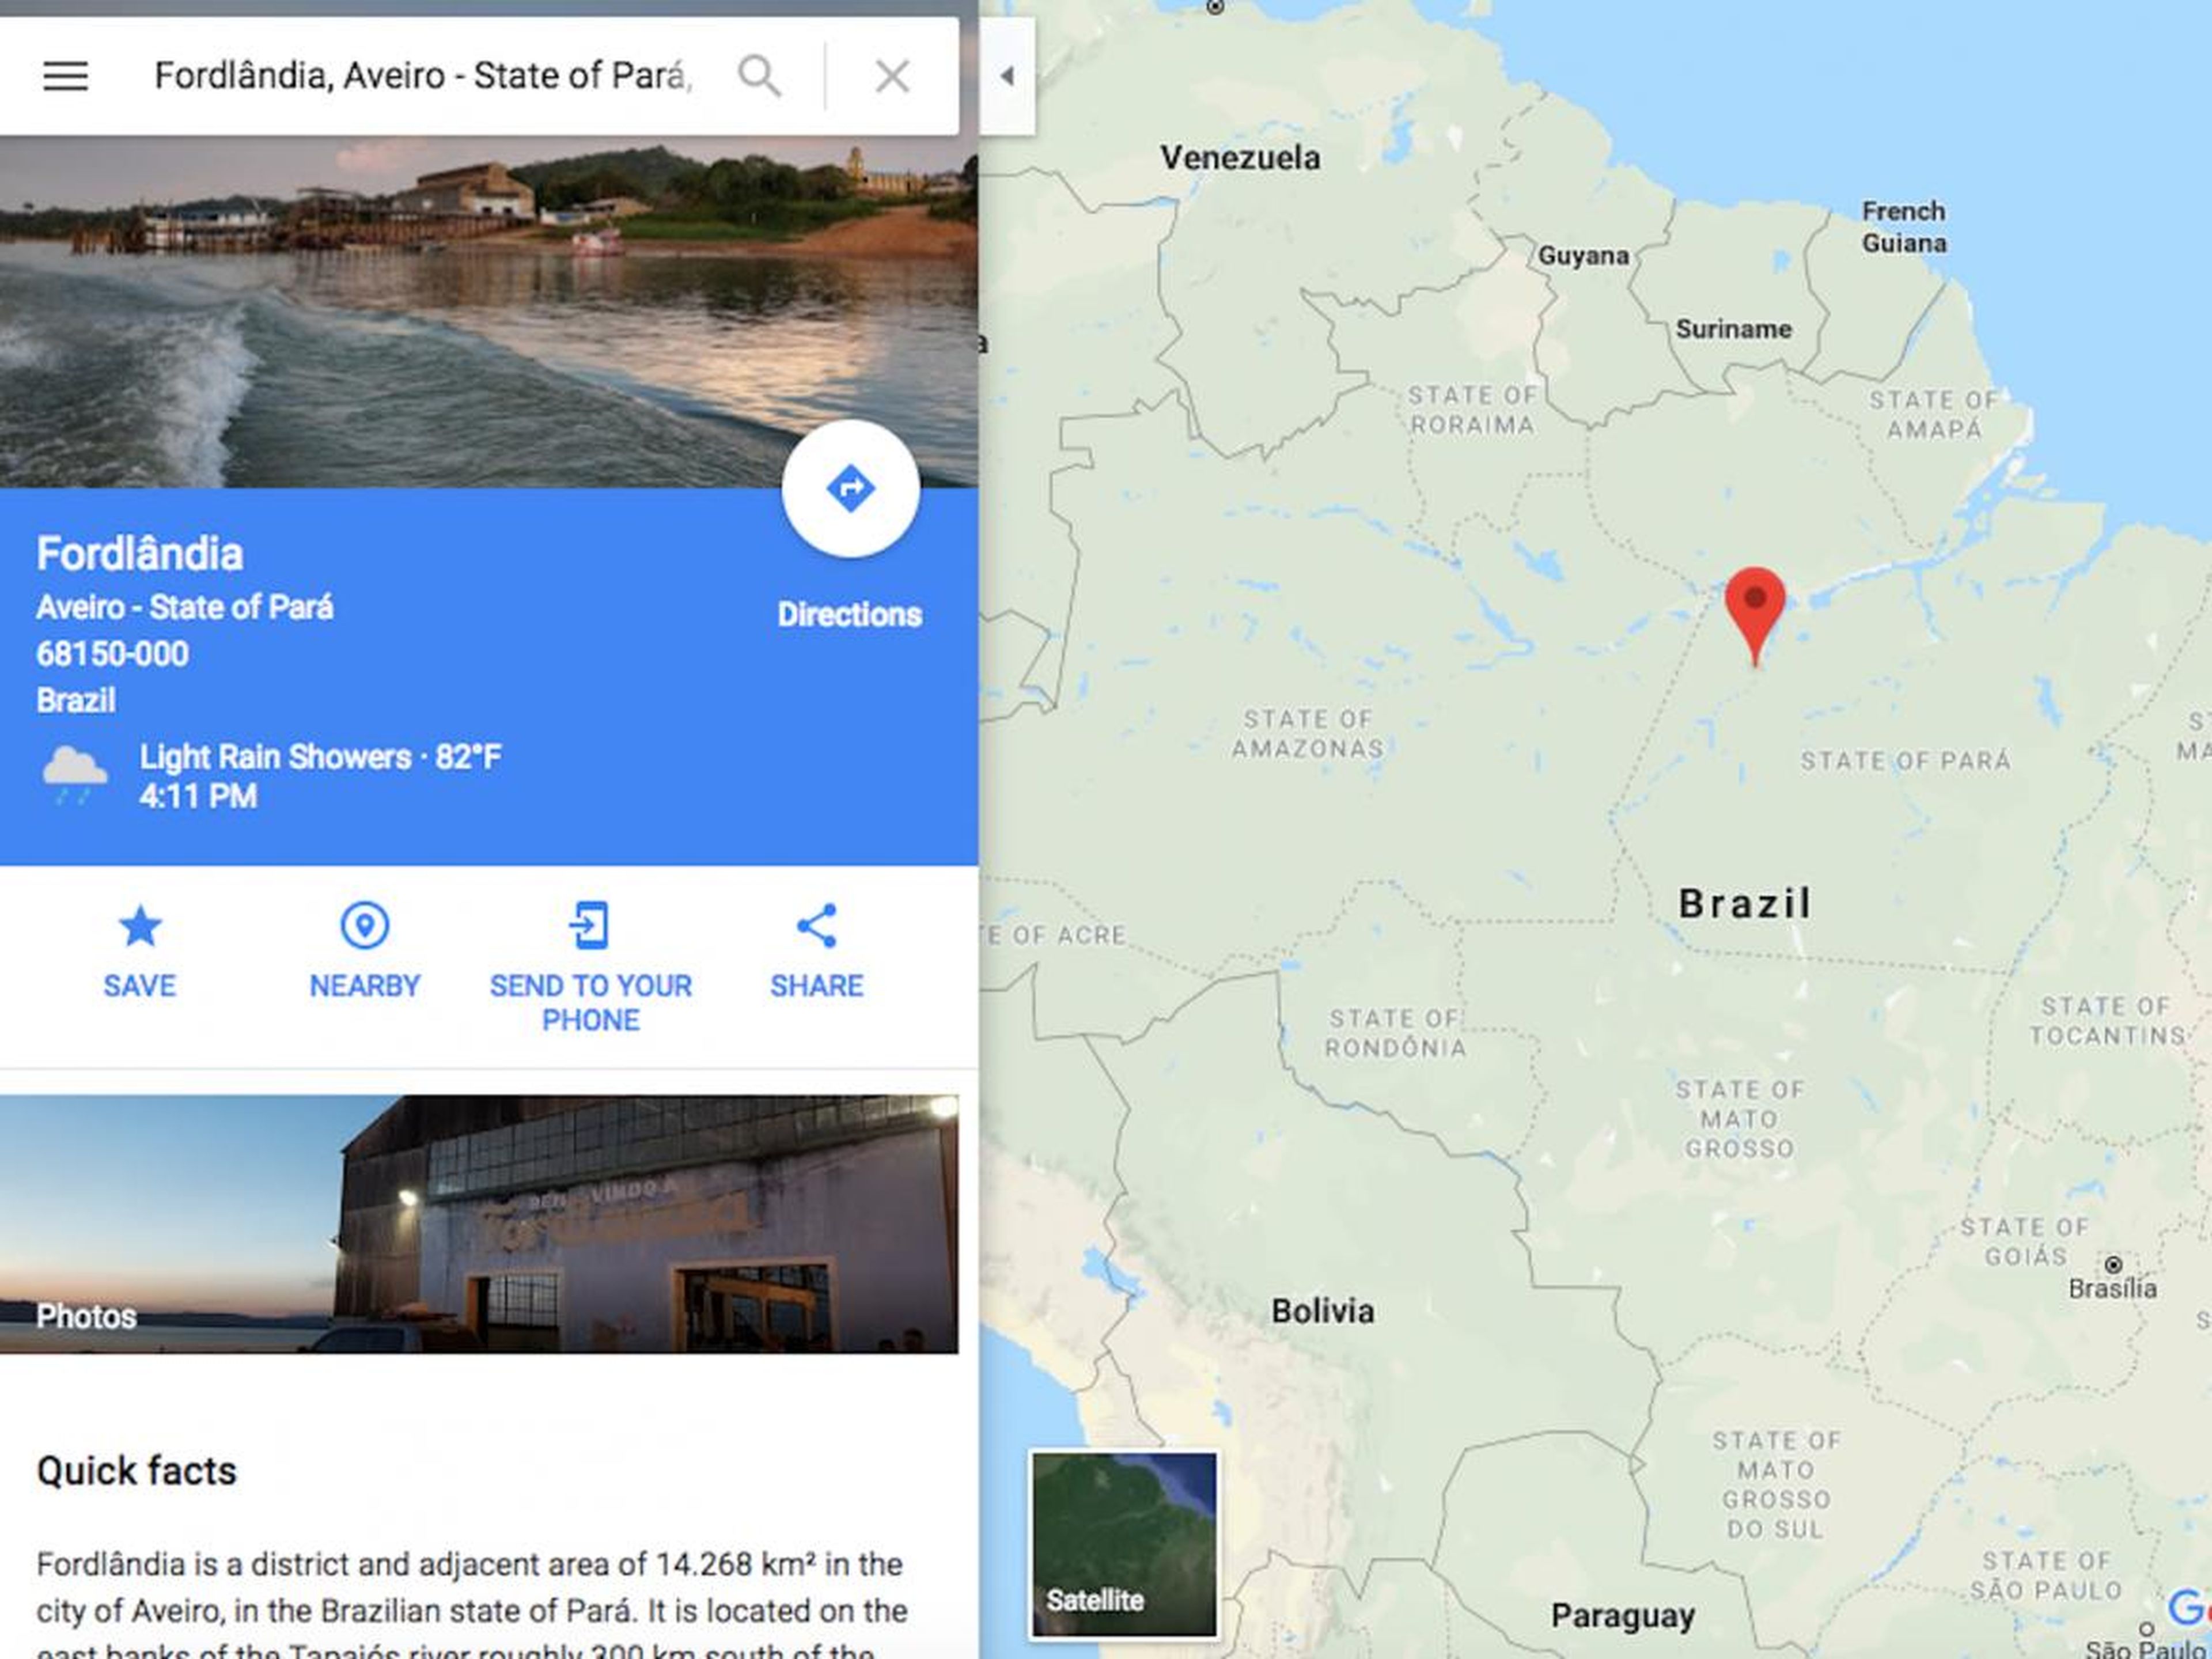 If you've never heard of Fordlandia before, no worries — Google has. The search engine recognizes it easily, tucked away in the Brazilian town of Aveiro.